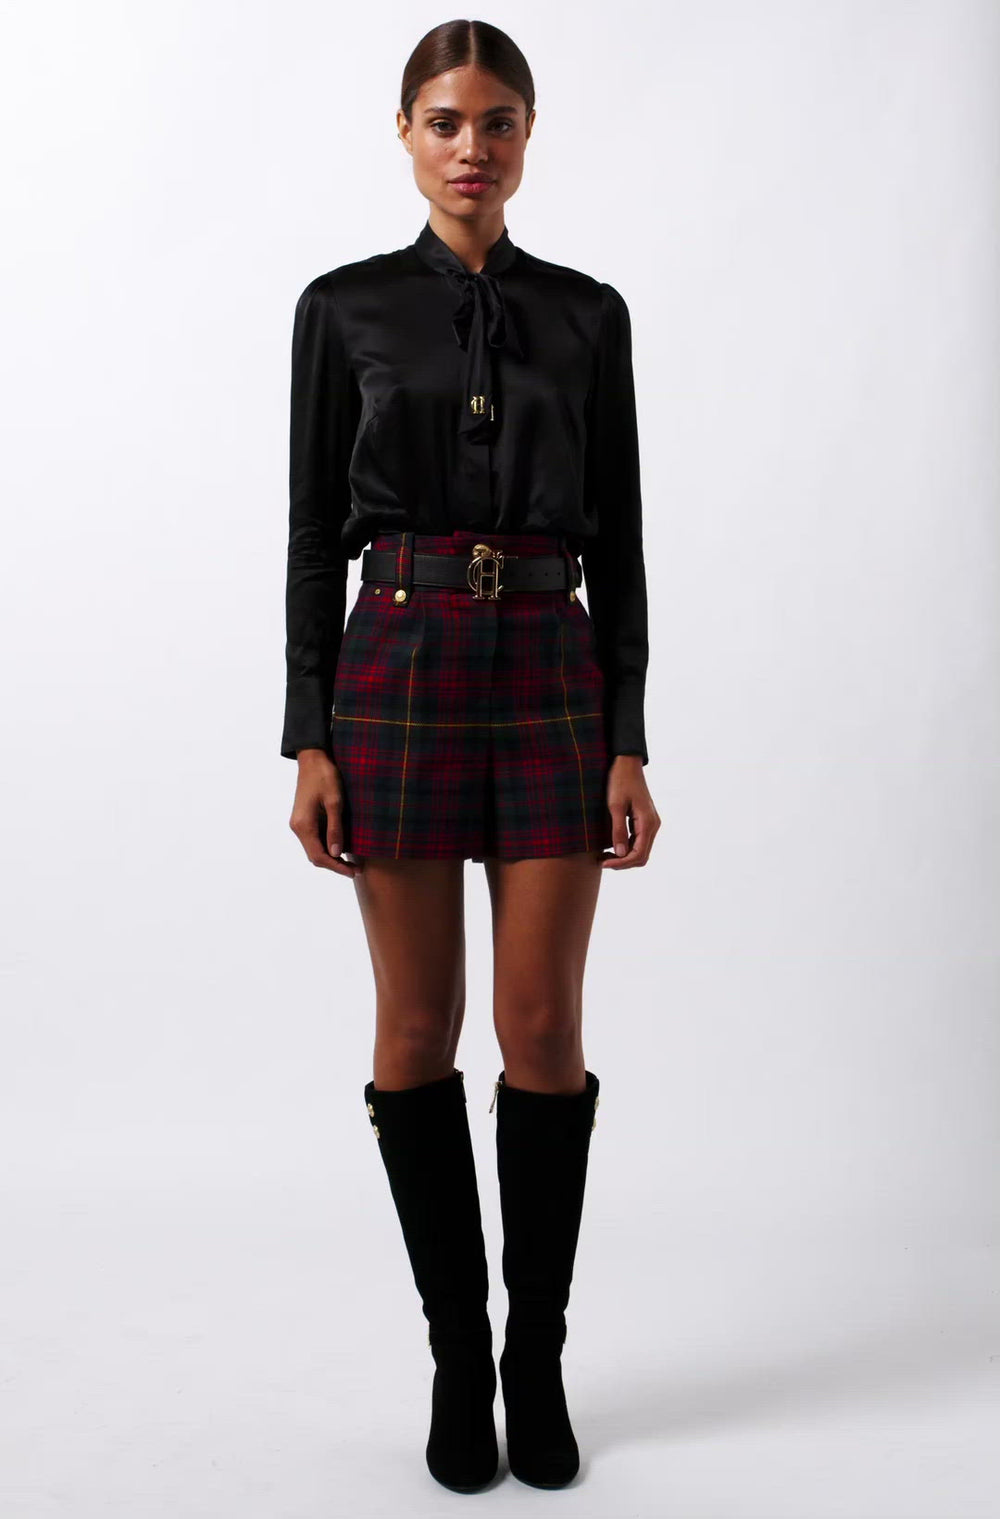 womens red green and blue tartan high rise tailored shorts with two single knife pleats and centre front zip fly fastening with twin branded gold stud buttons and side hip pockets with branded rivet detailing at top and bottom of pockets worn with black silk shirt